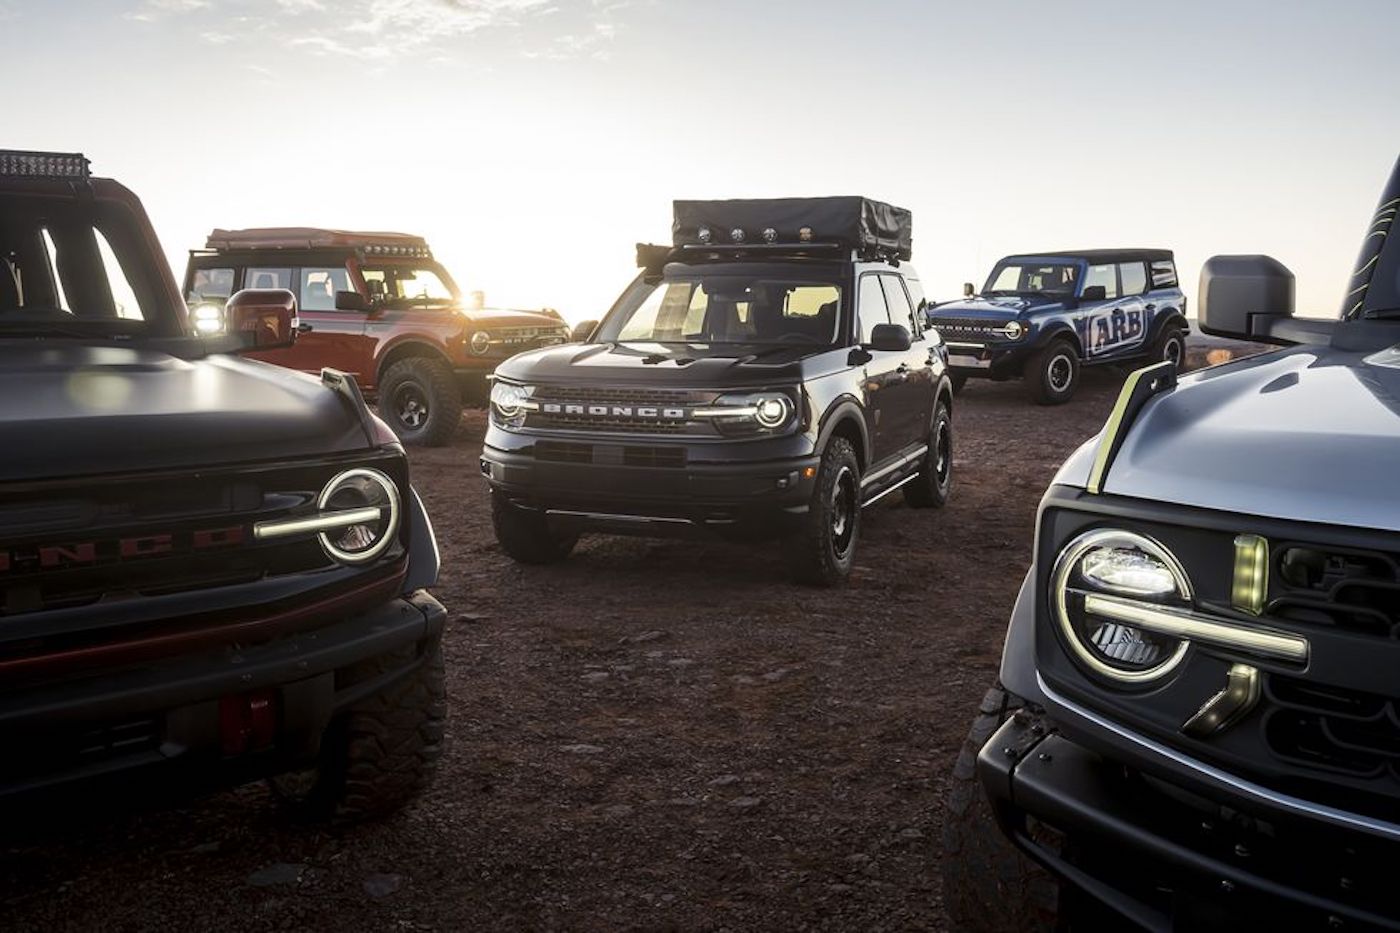 Five Ford Bronco Concepts showed up to the Easter Jeep Safari this week